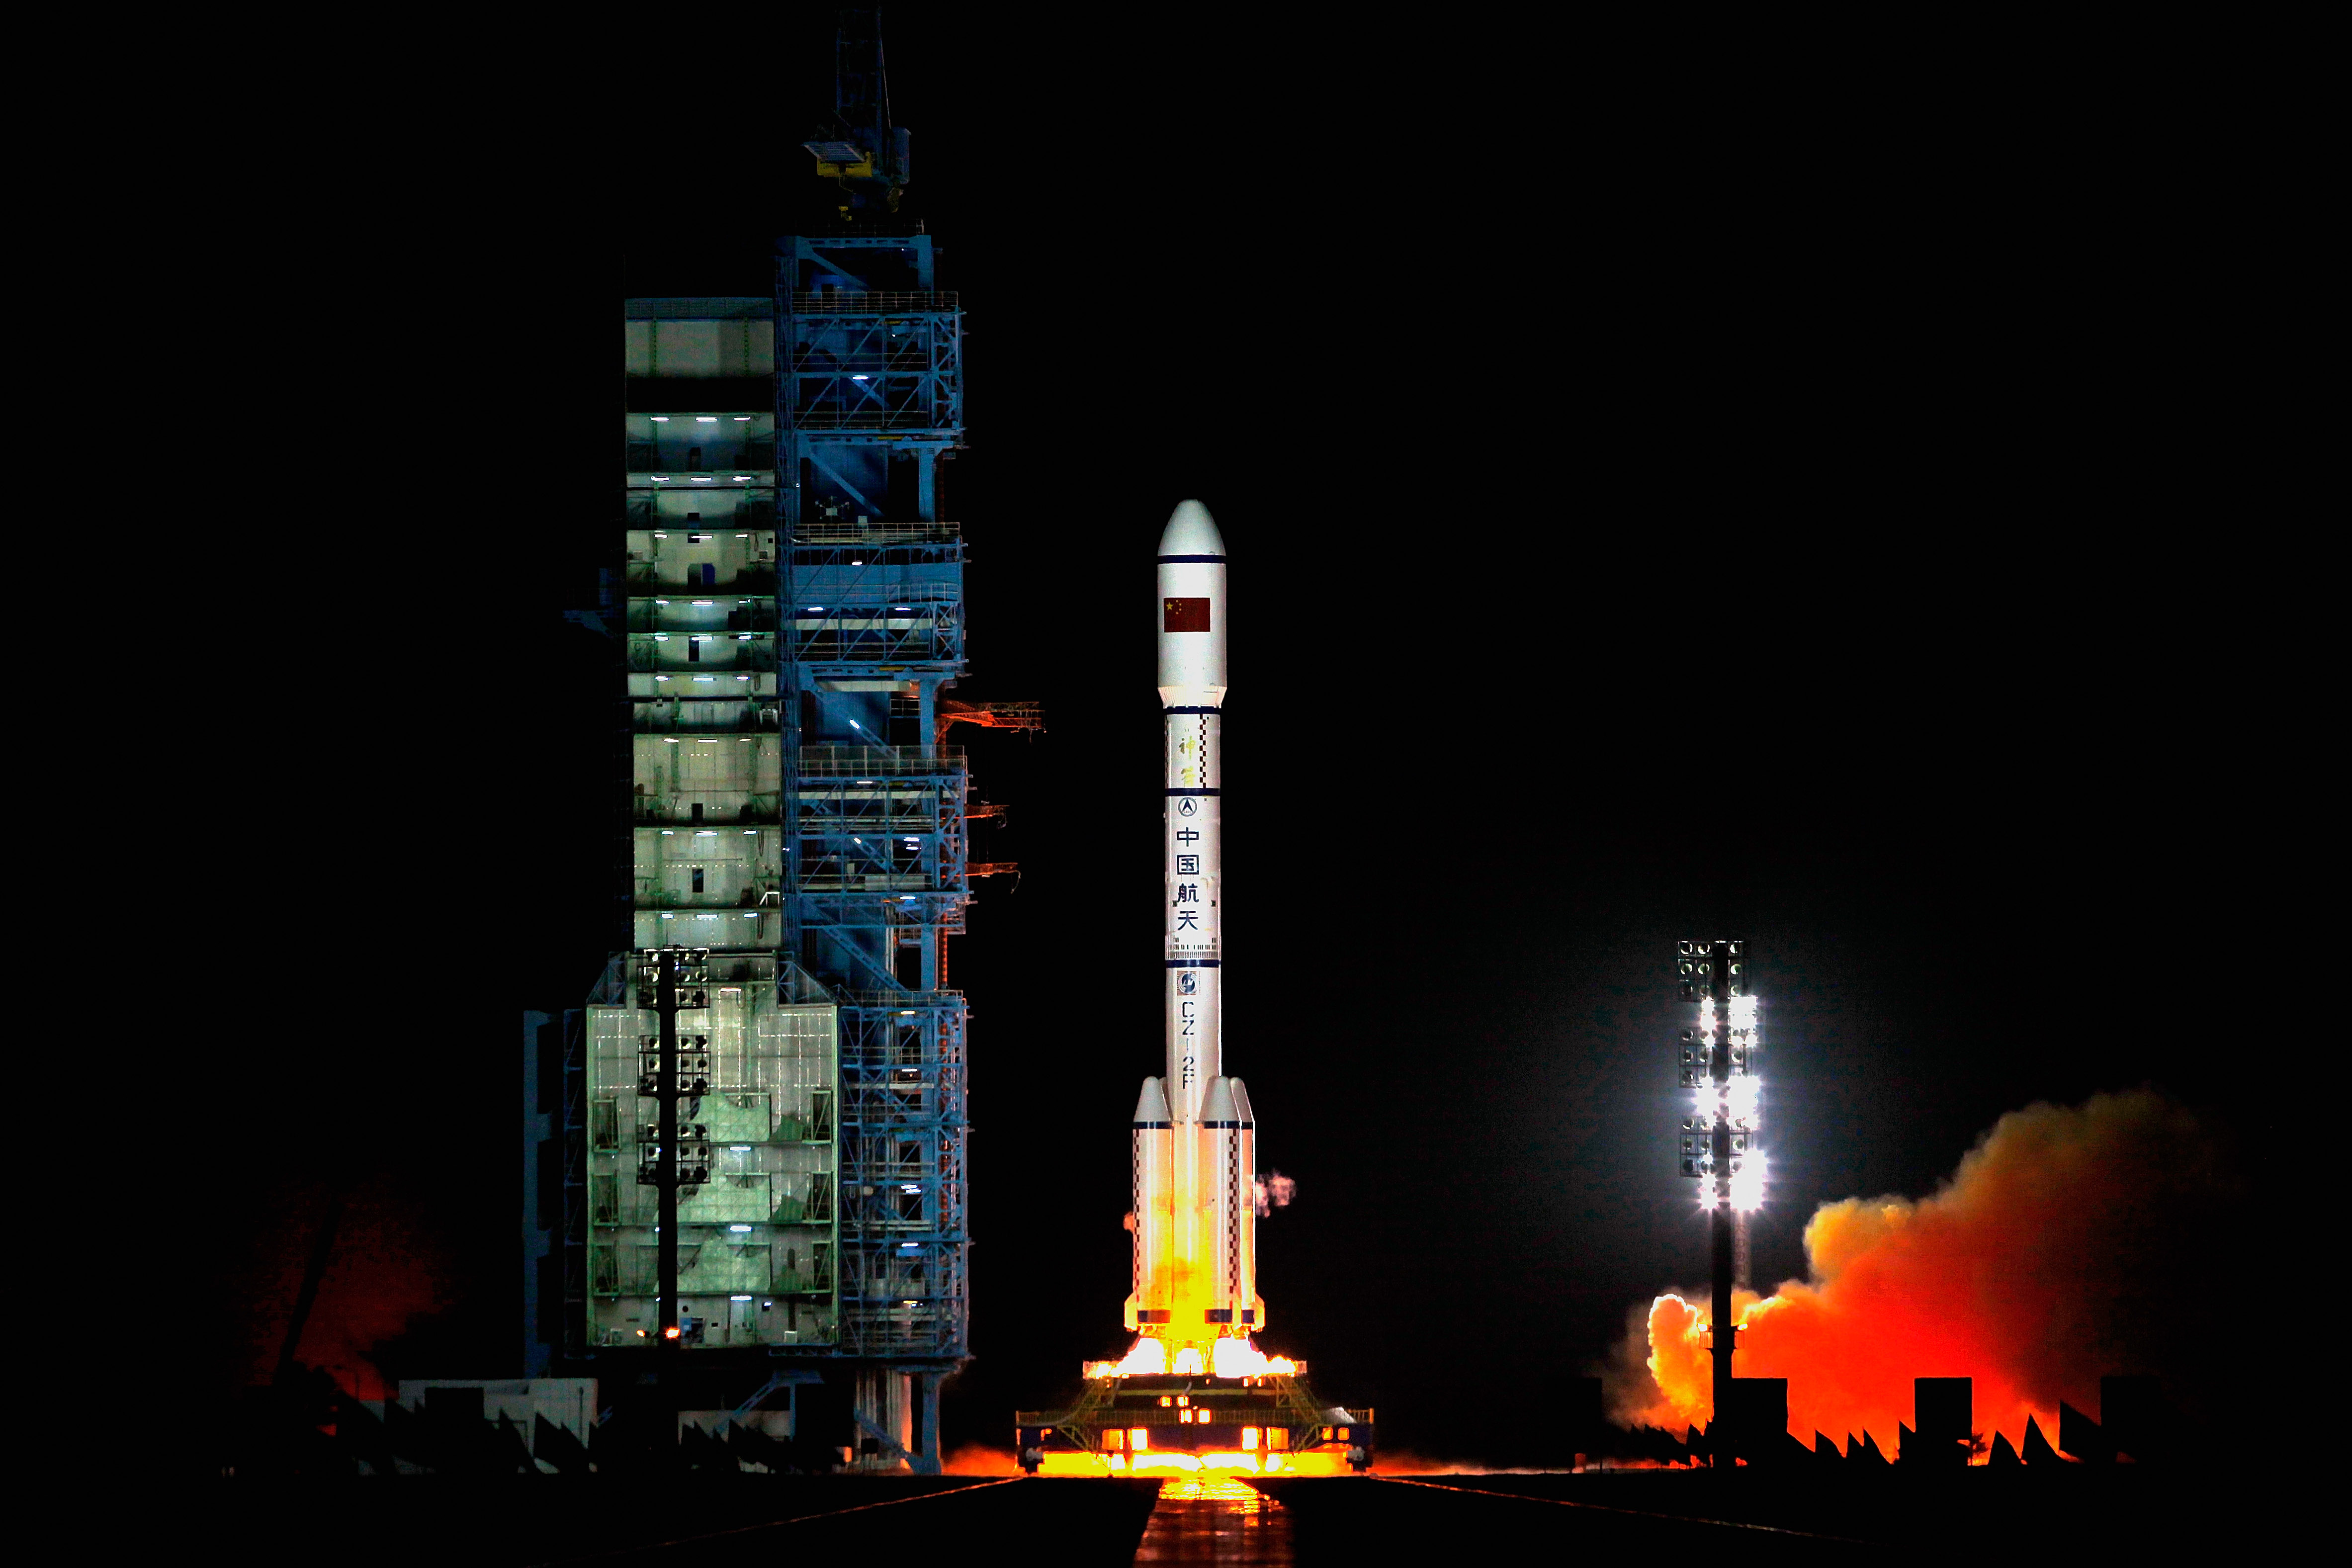 A Long March 2F rocket carrying the country&#039;s first space laboratory module Tiangong-1 lifts off from the Jiuquan Satellite Launch Center on September 29, 2011.